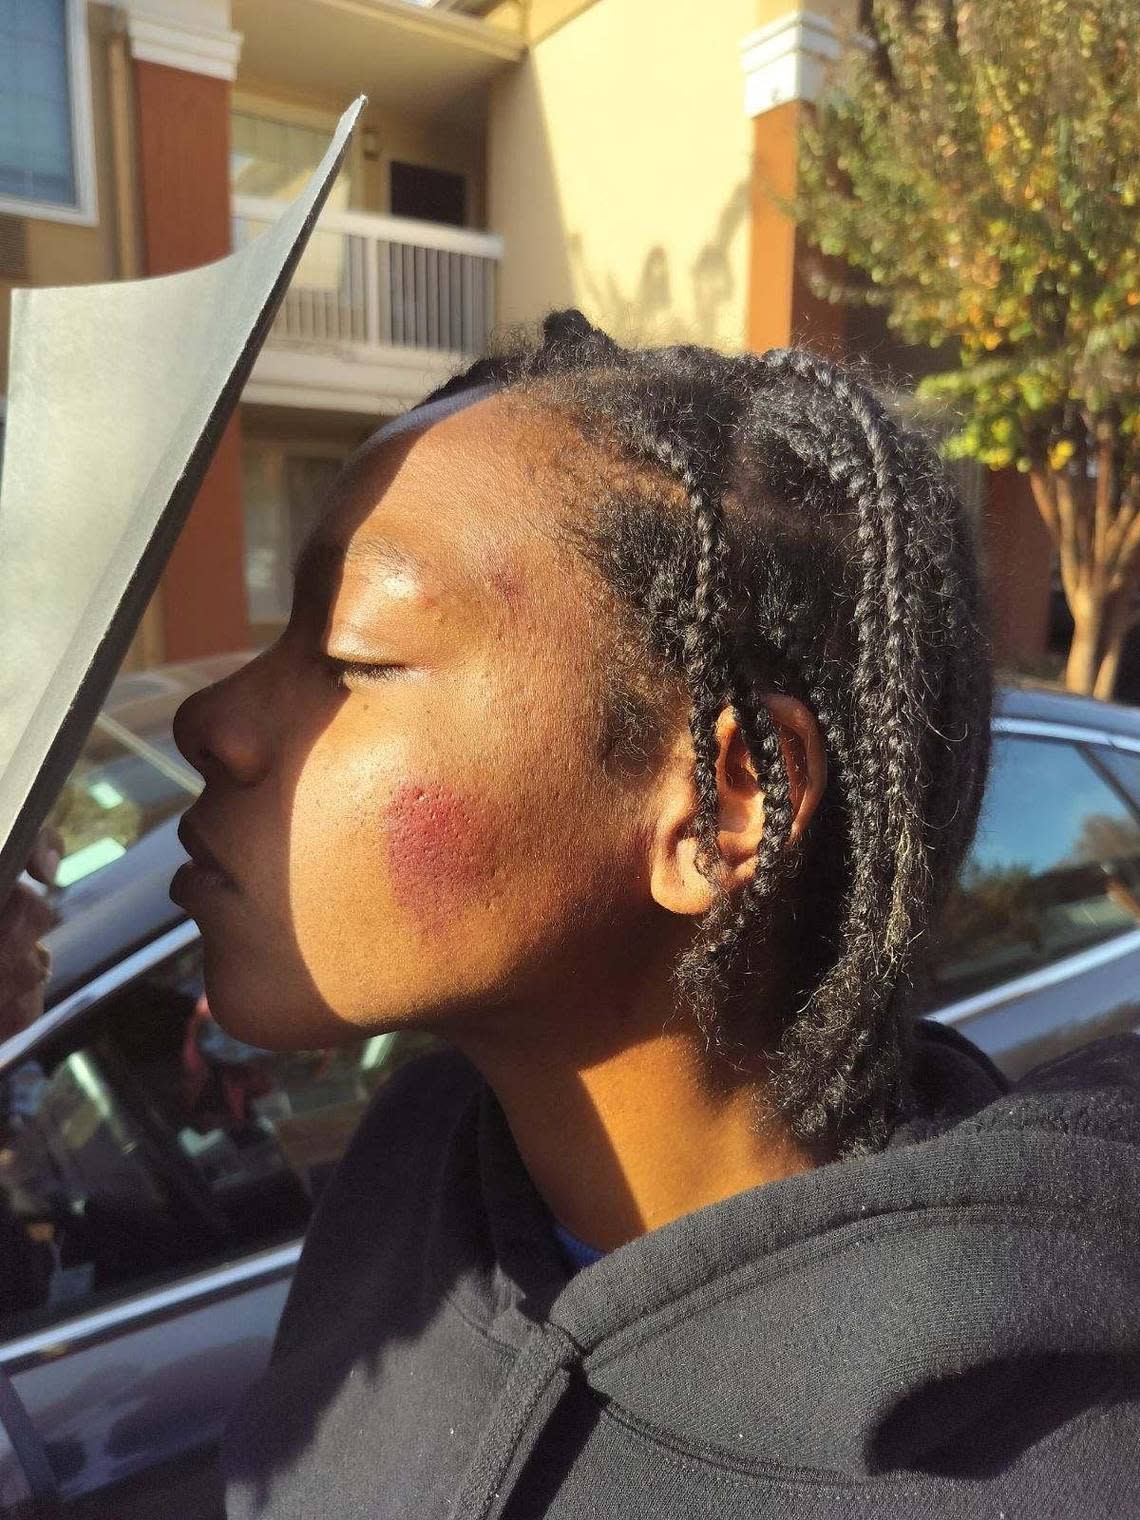 A photo provided by Team Trublue founder Will Adams shows marks on one side of Christina Pierre’s face. An officer struck her in the face, police confirmed.